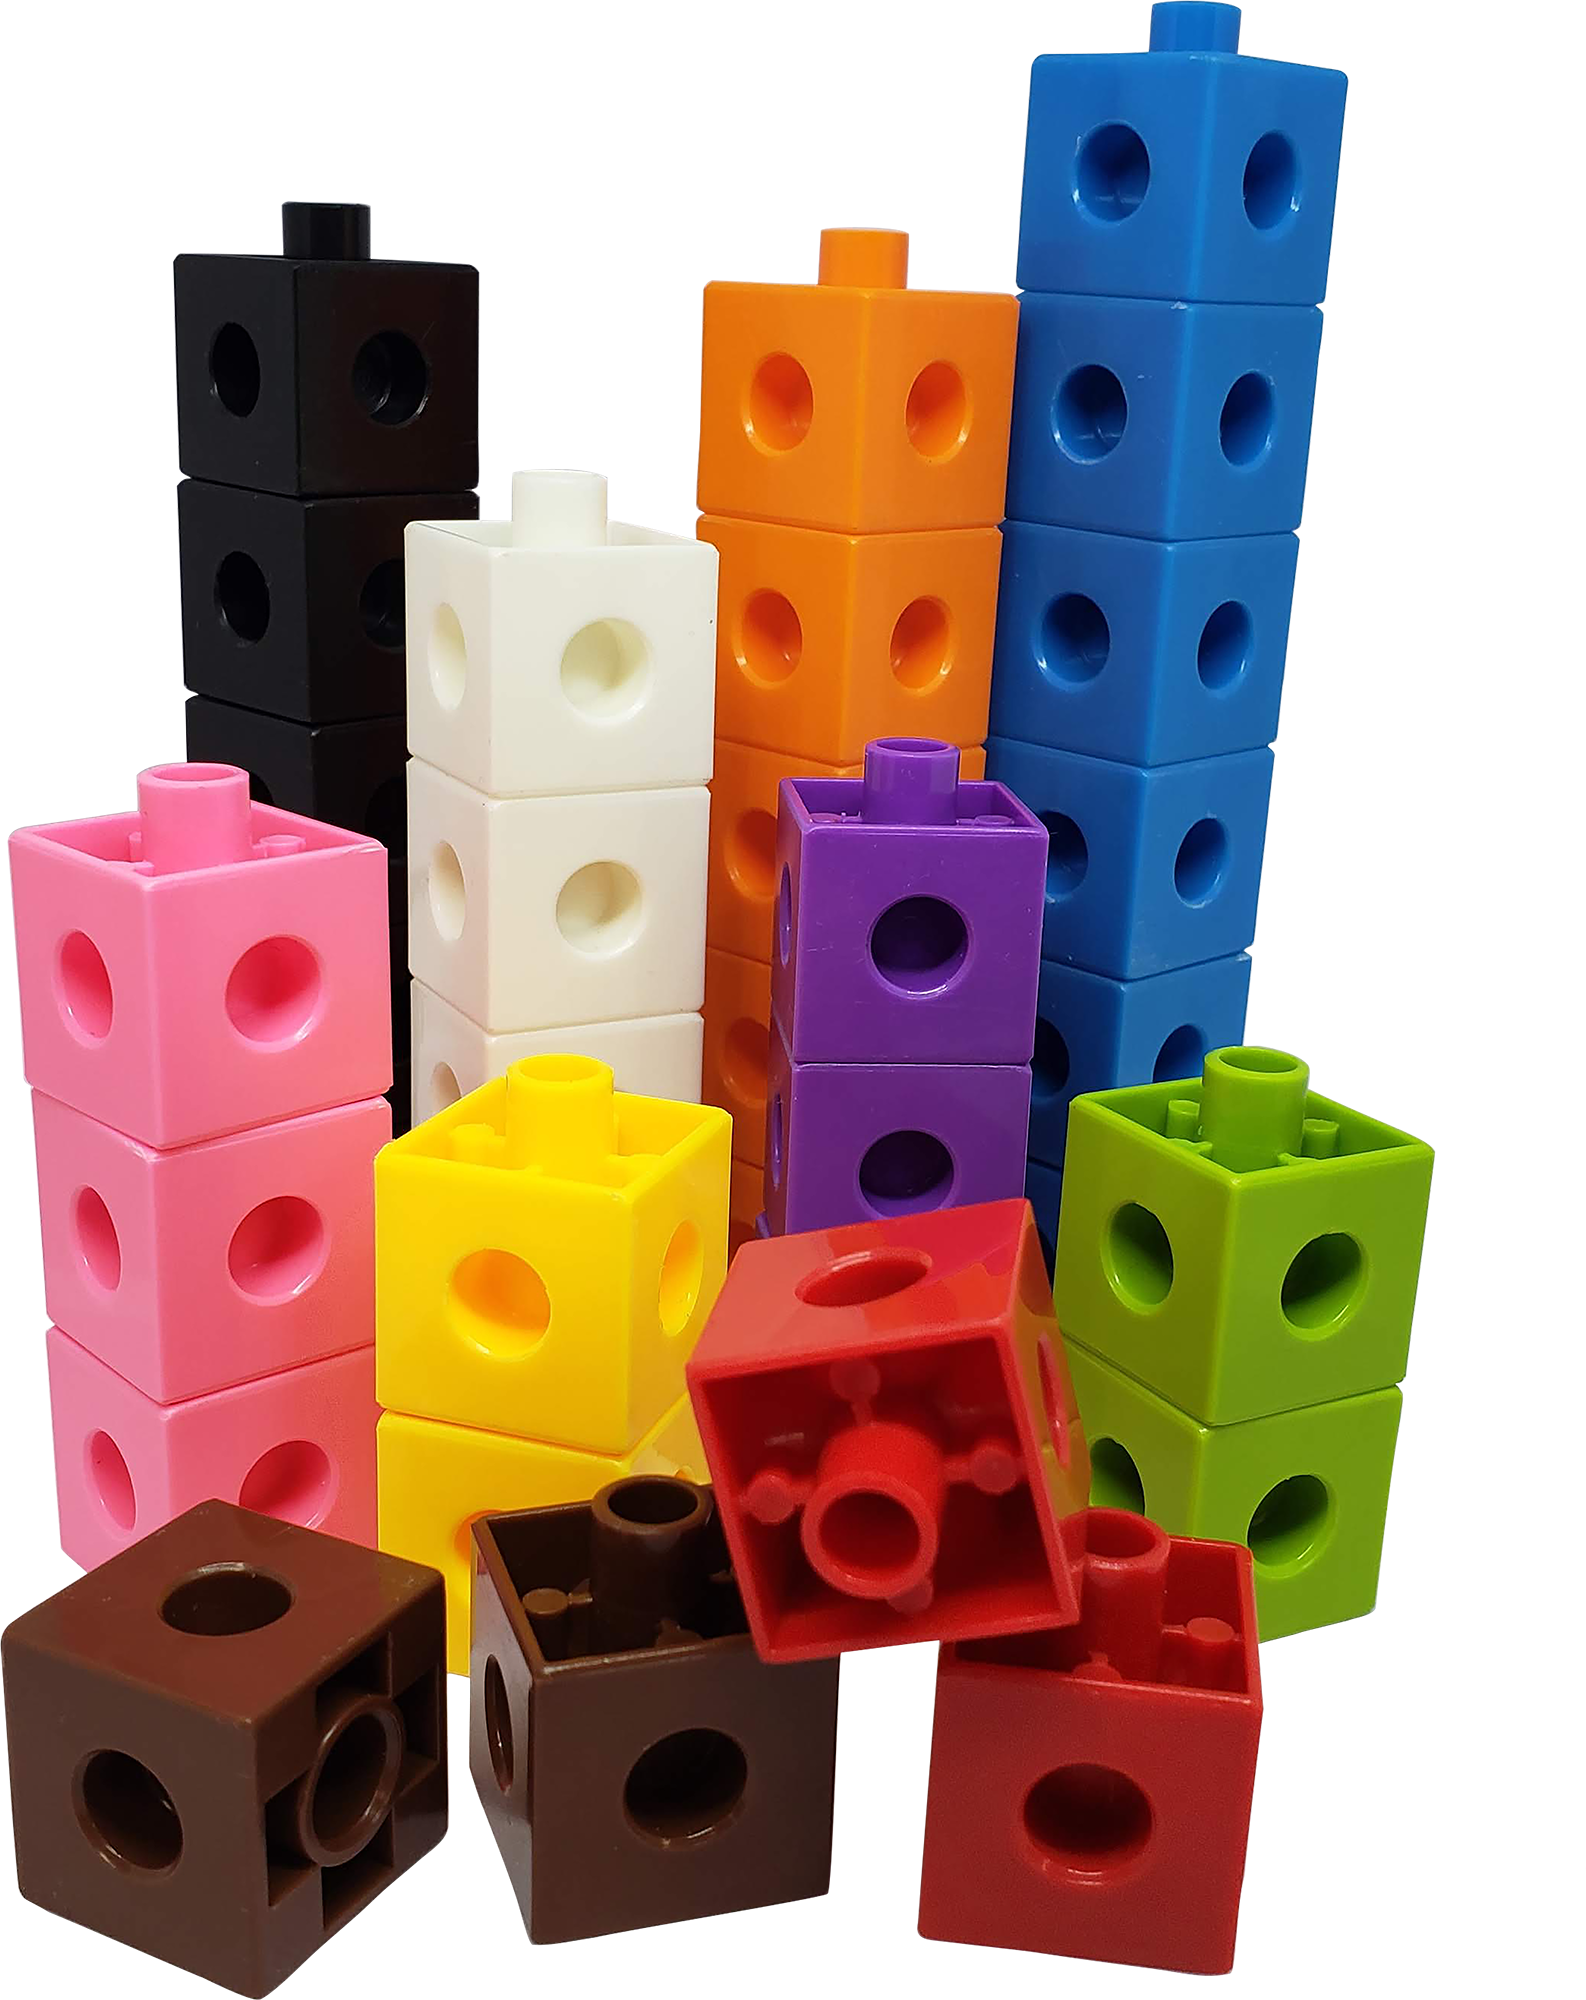 100 Pcs Multilink Linking Cubes Math Manipulative Counting